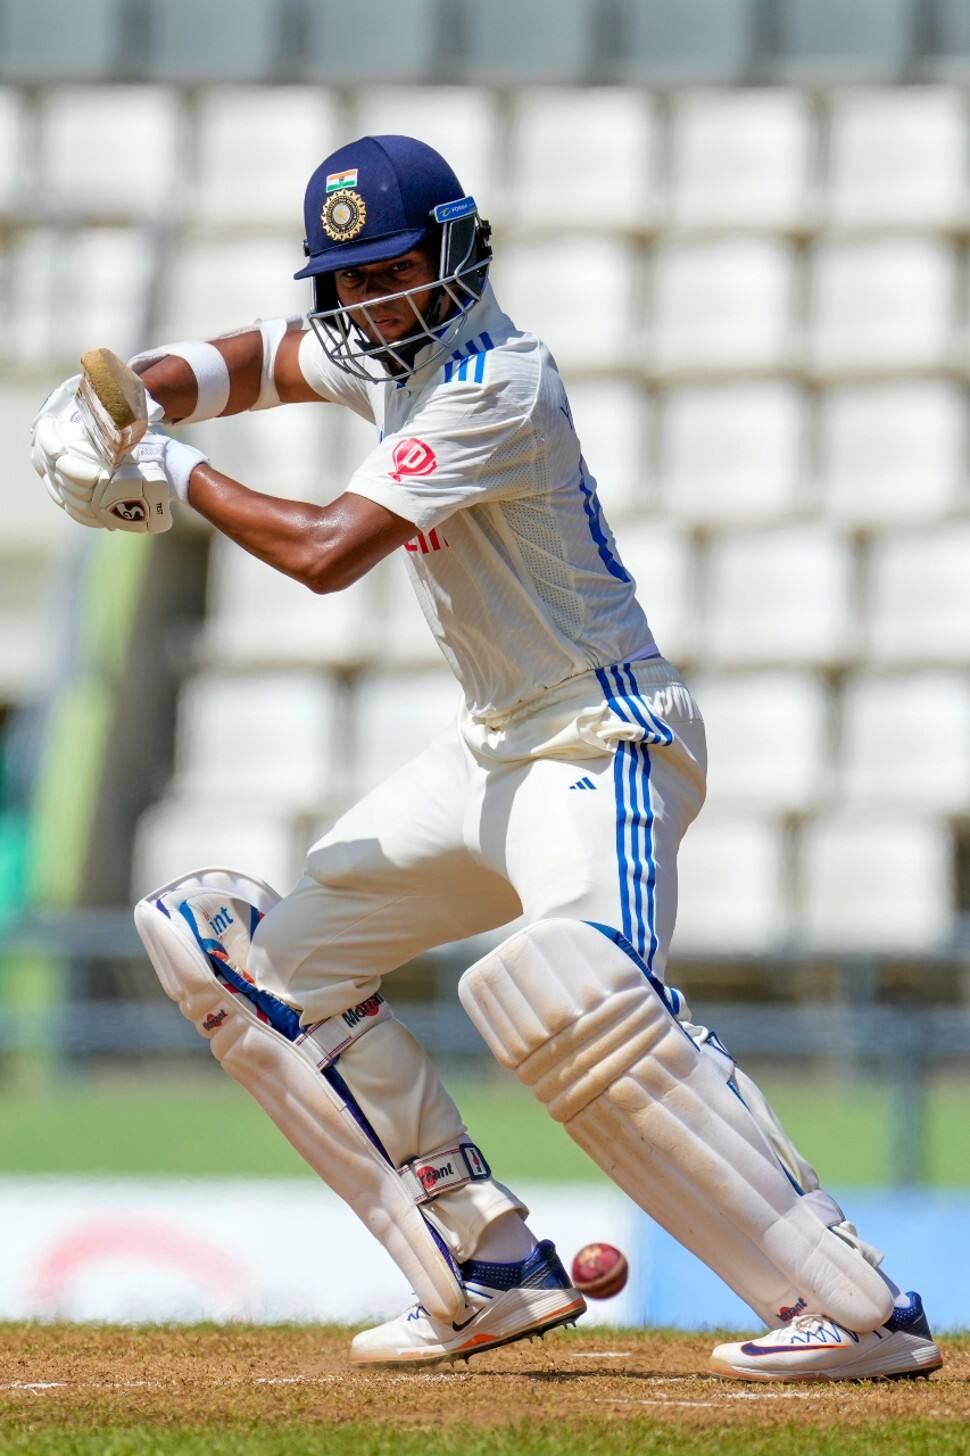 Yashasvi Jaiswal and Rohit Sharma put on the third highest opening partnership by visiting batters in Port of Spain on Day 1 of 2nd Test vs West Indies, Jaiswal, who scored 50, put on 139 runs for the opening wicket with captain Rohit Sharma. (Photo: AP)